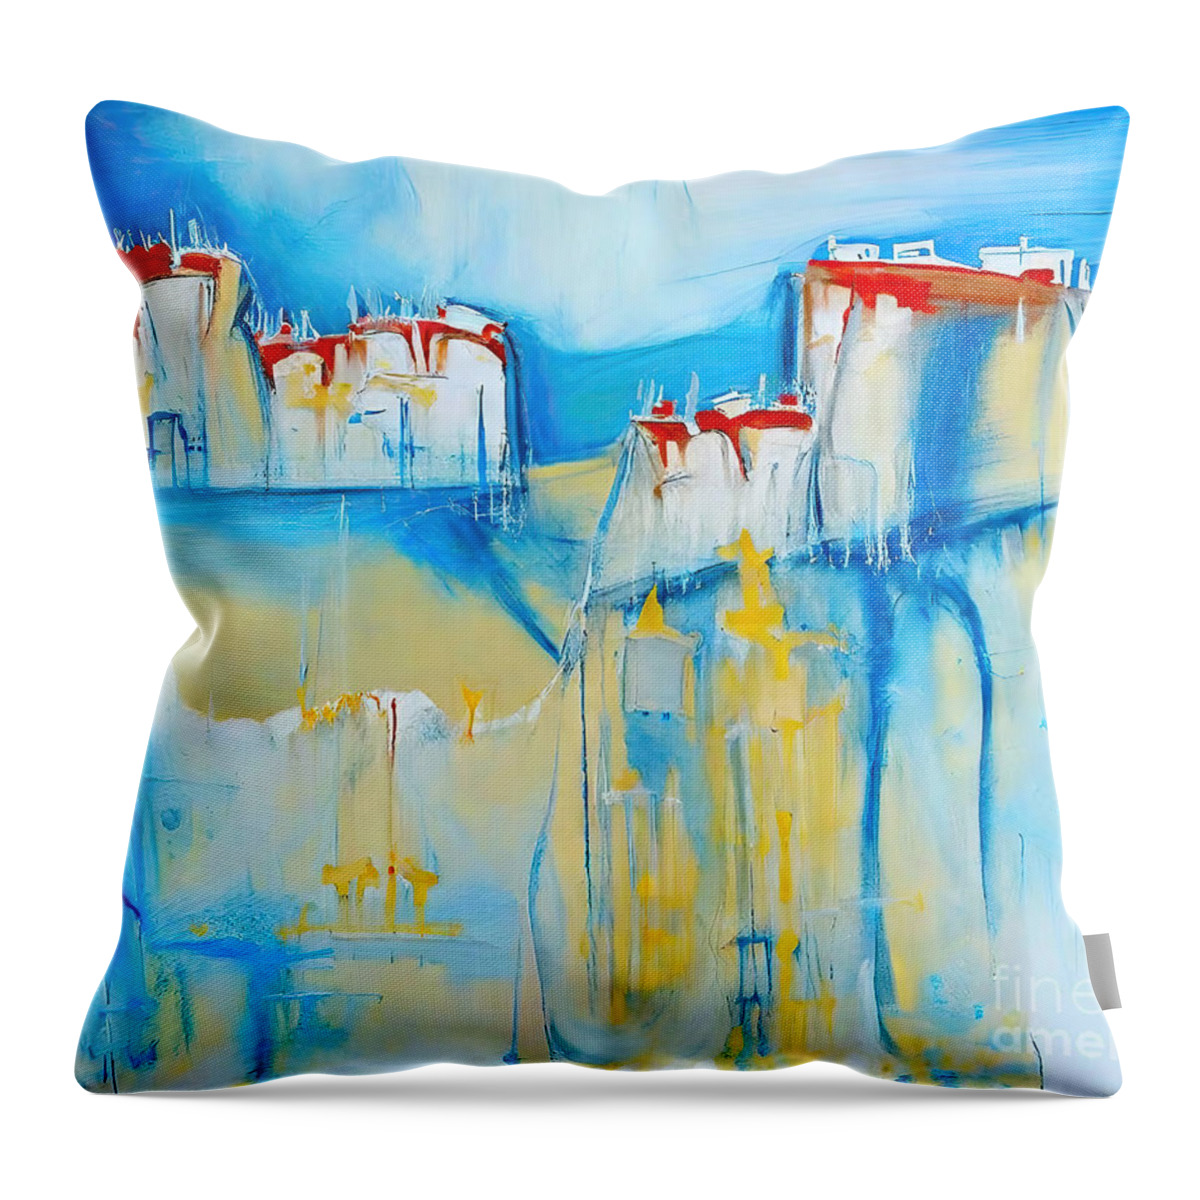 Red Throw Pillow featuring the painting Klint with red houses by N Akkash